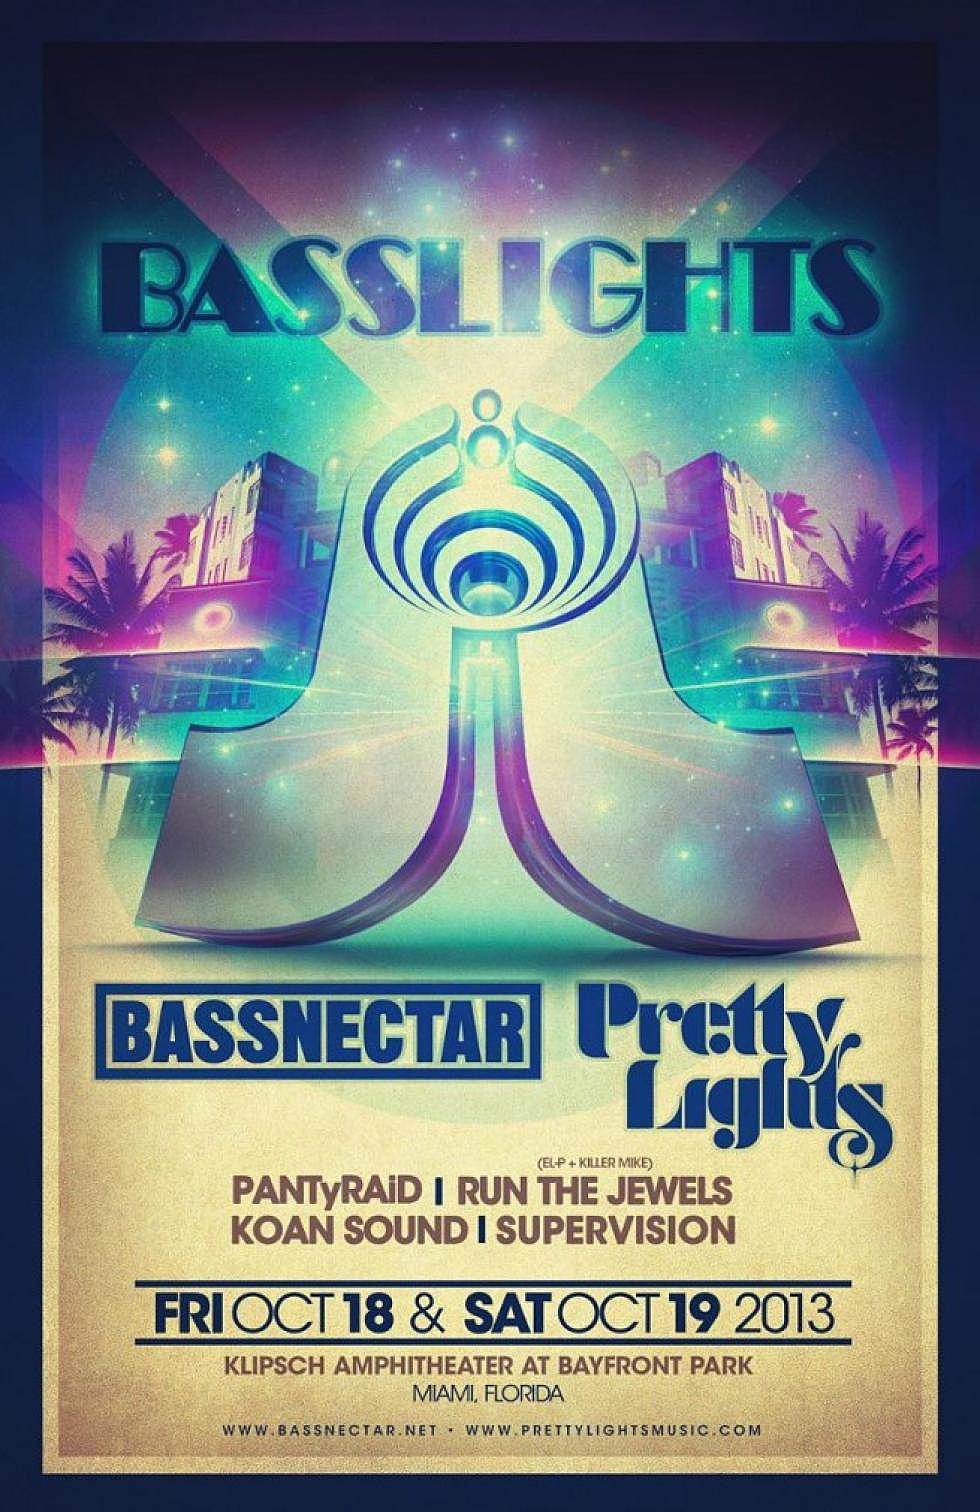 Bassnectar &#038; Pretty Lights announce &#8220;Basslights 2.0&#8243; in Miami, October 18th &#038; 19th